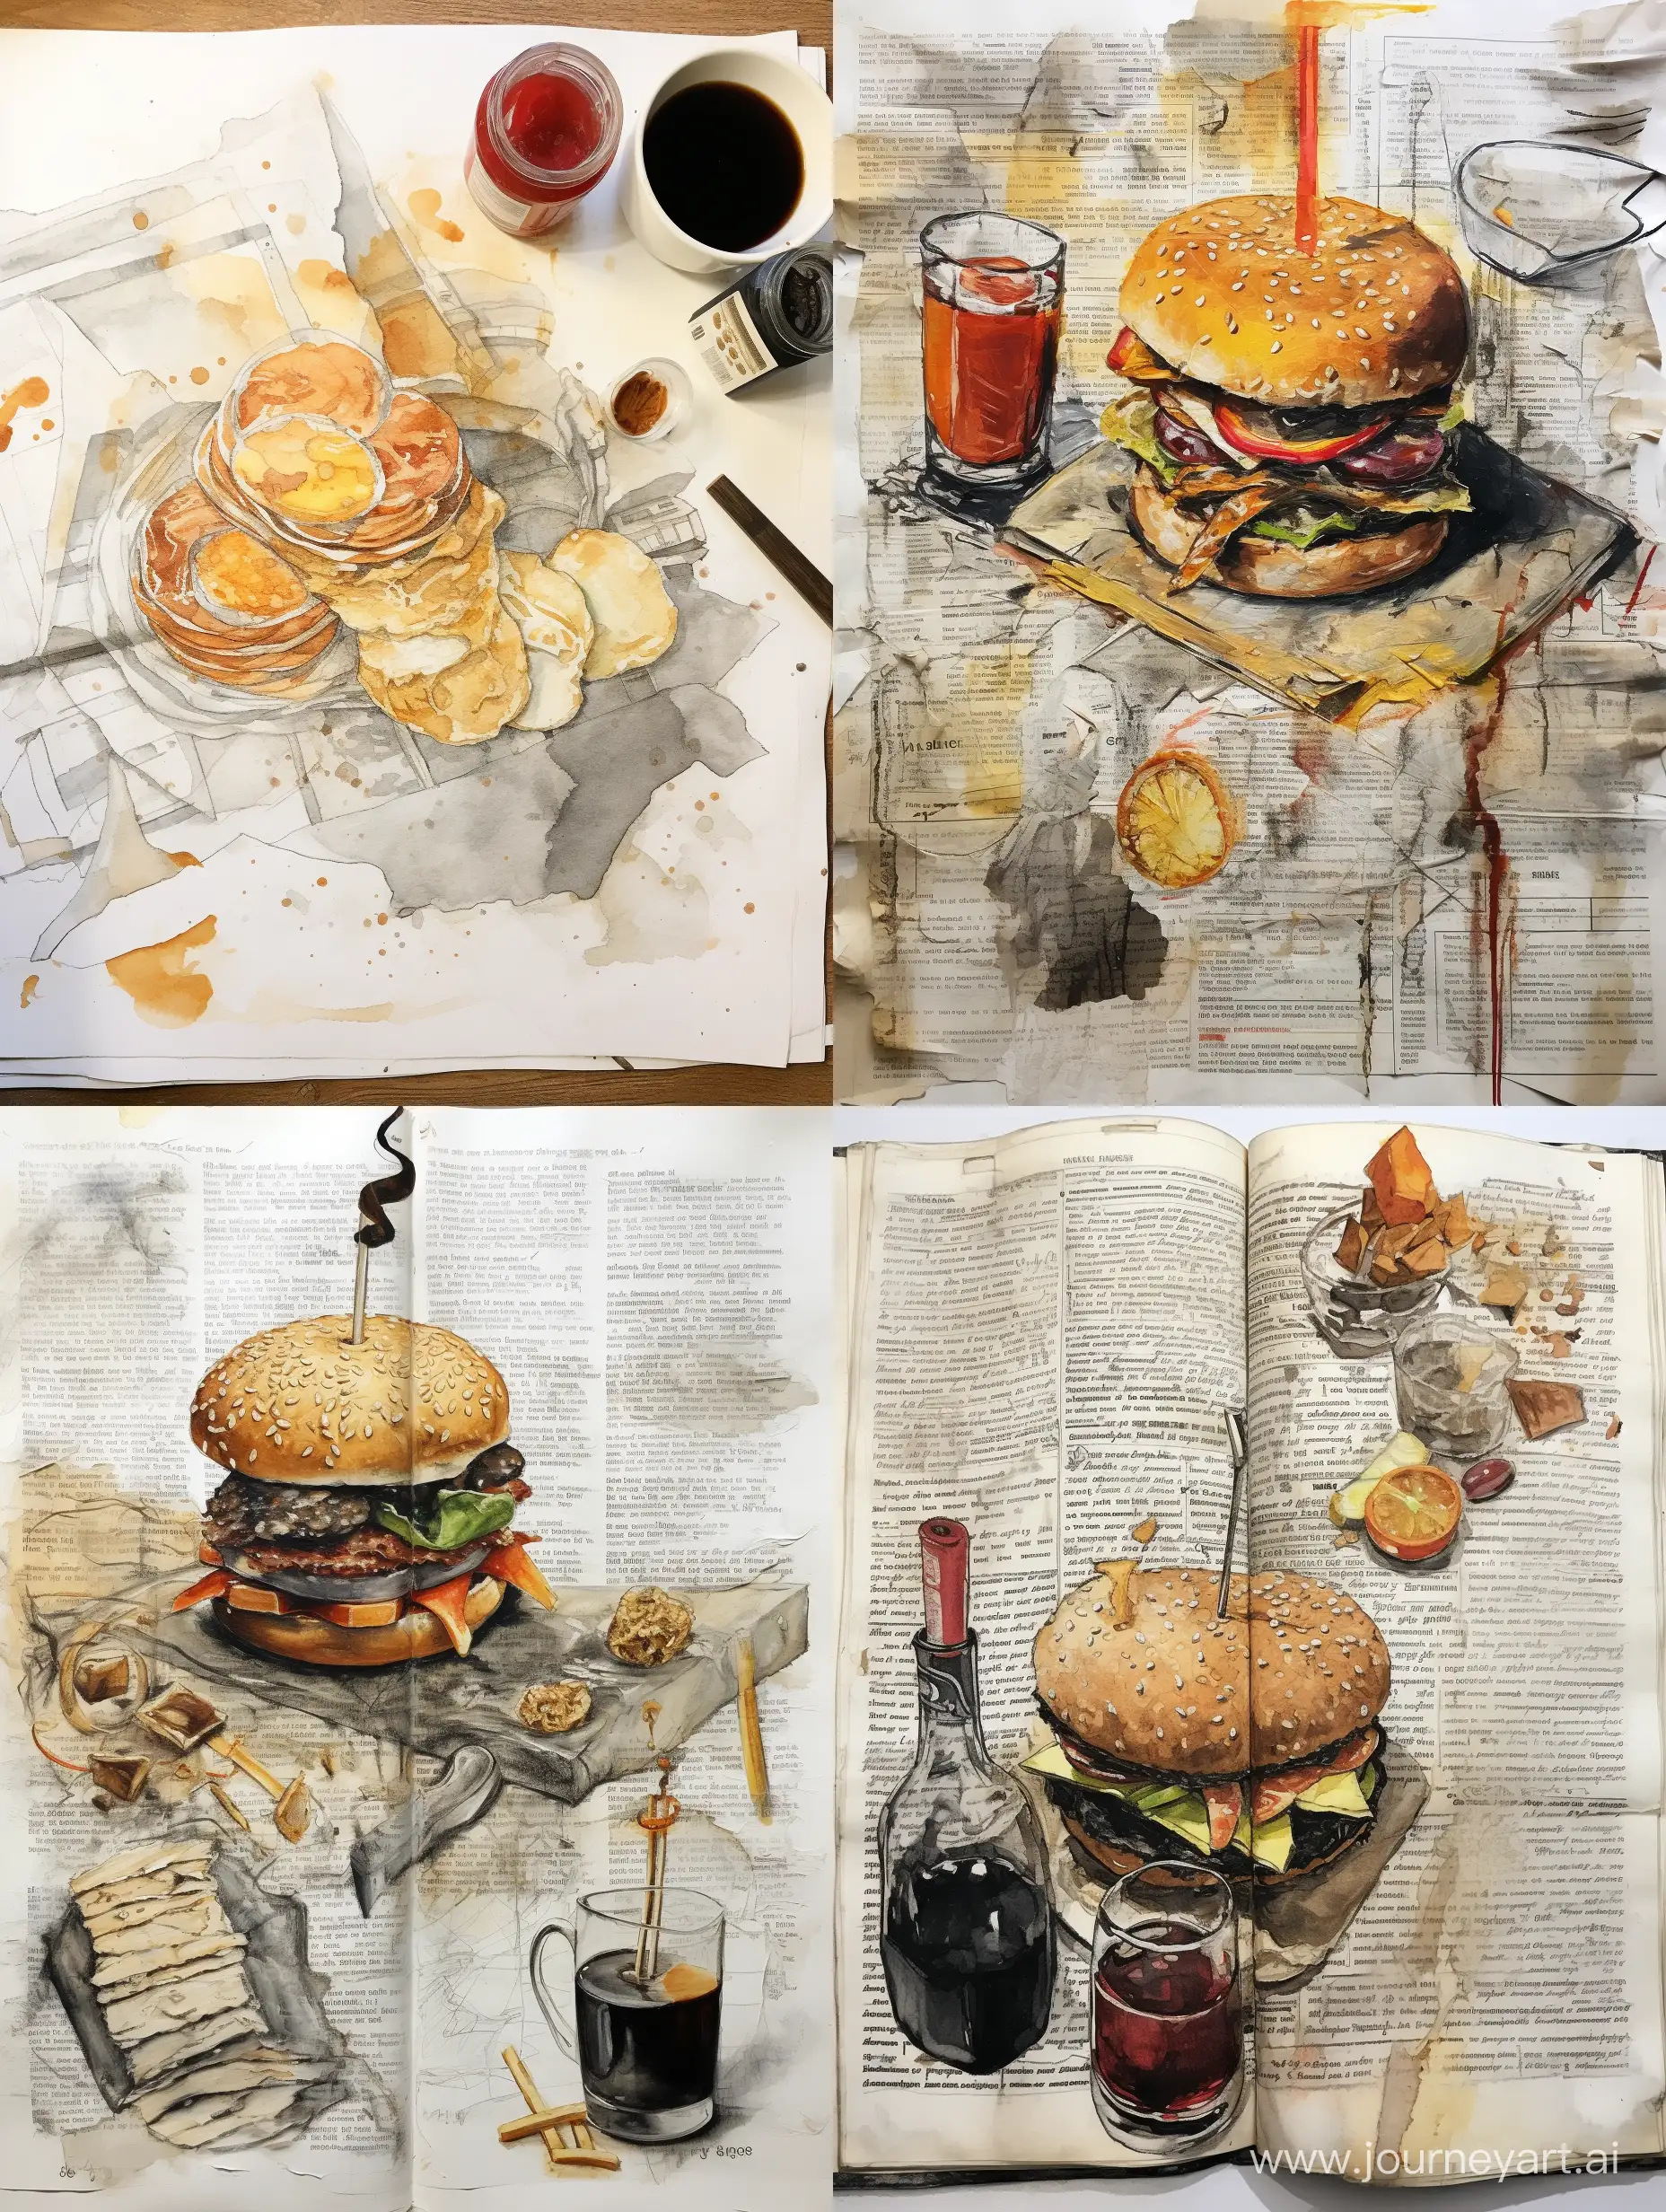 Surreal-Inked-Scene-Unfinished-Burger-and-Whiskey-with-Manuscript-Pages